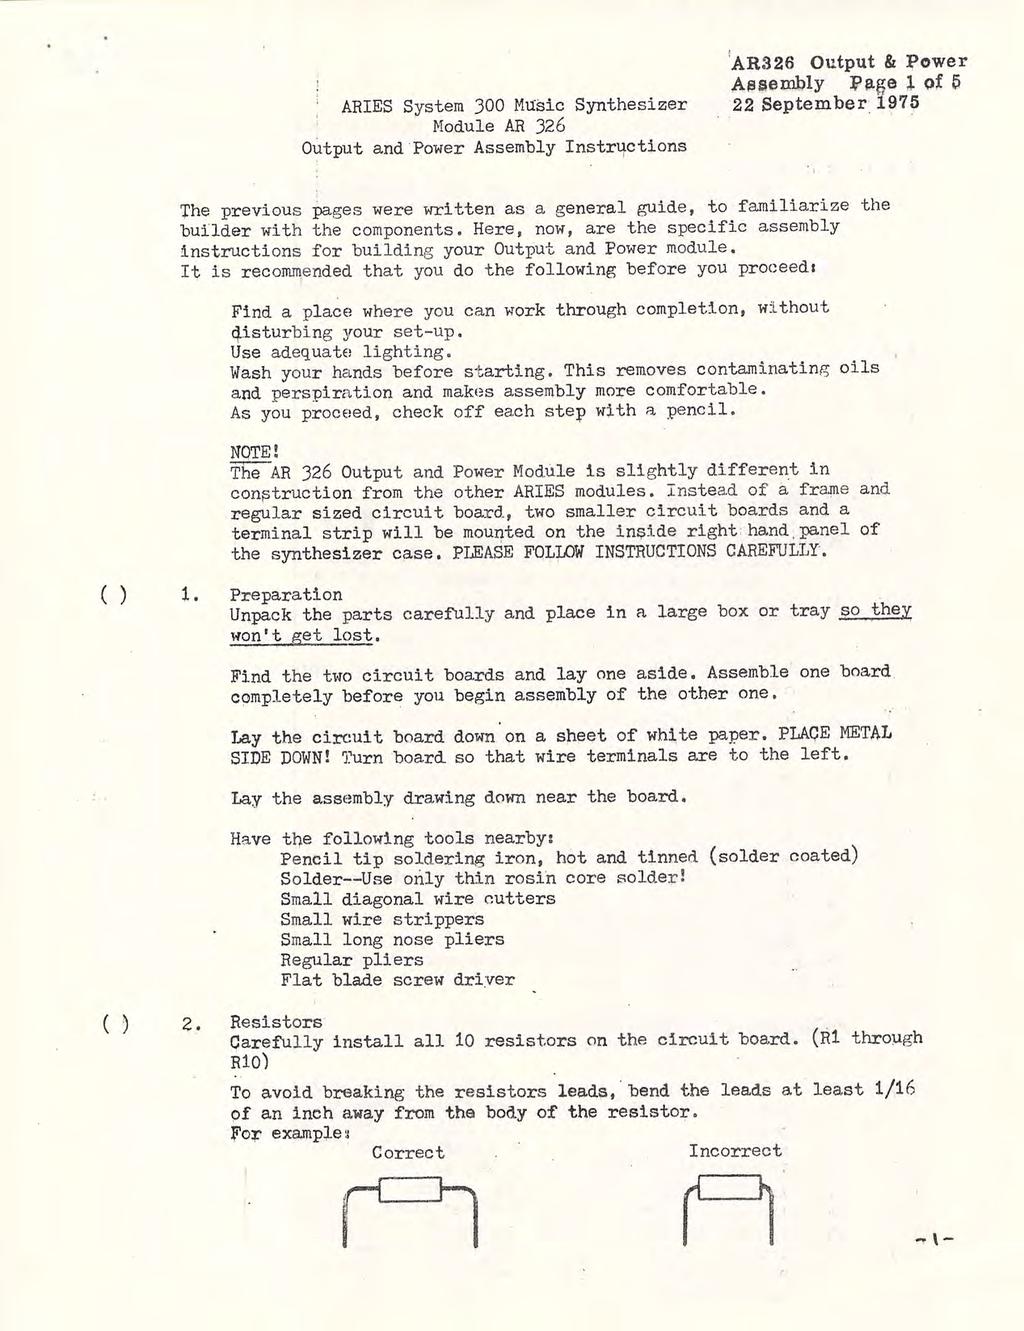 ARIES System 300 Music Synthesizer Module AR 36 Output and Power Assembly Instructions AR36 Output & Power Assembly Page 1 of 5 September 1975 The previous pages were written as a general guide, to